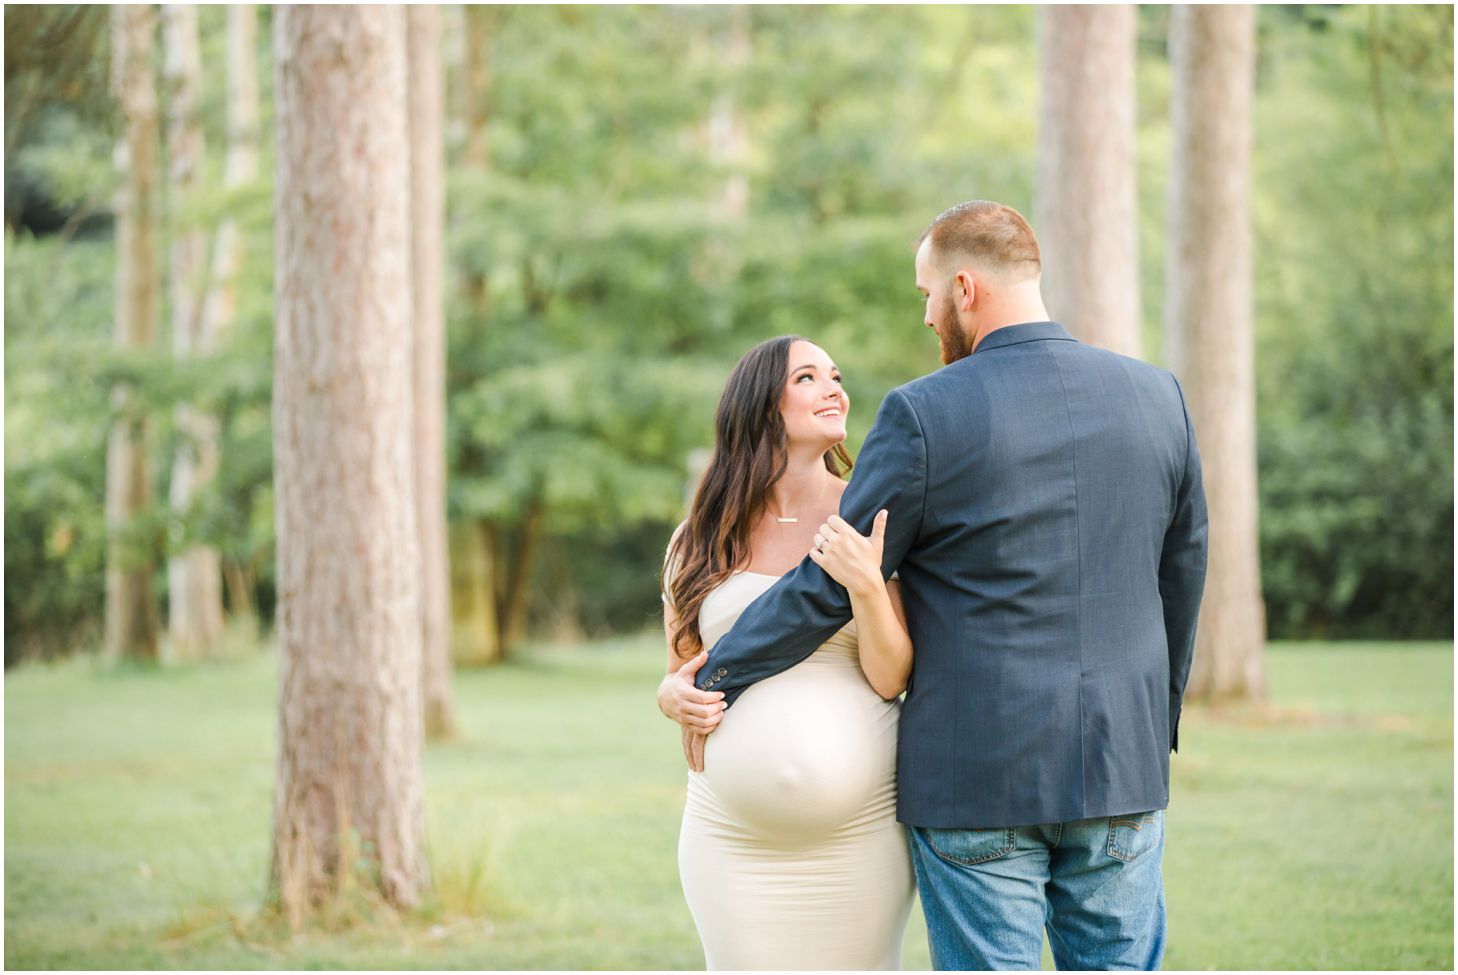 Couple in woods for maternity pictures at North Park in Pittsburgh